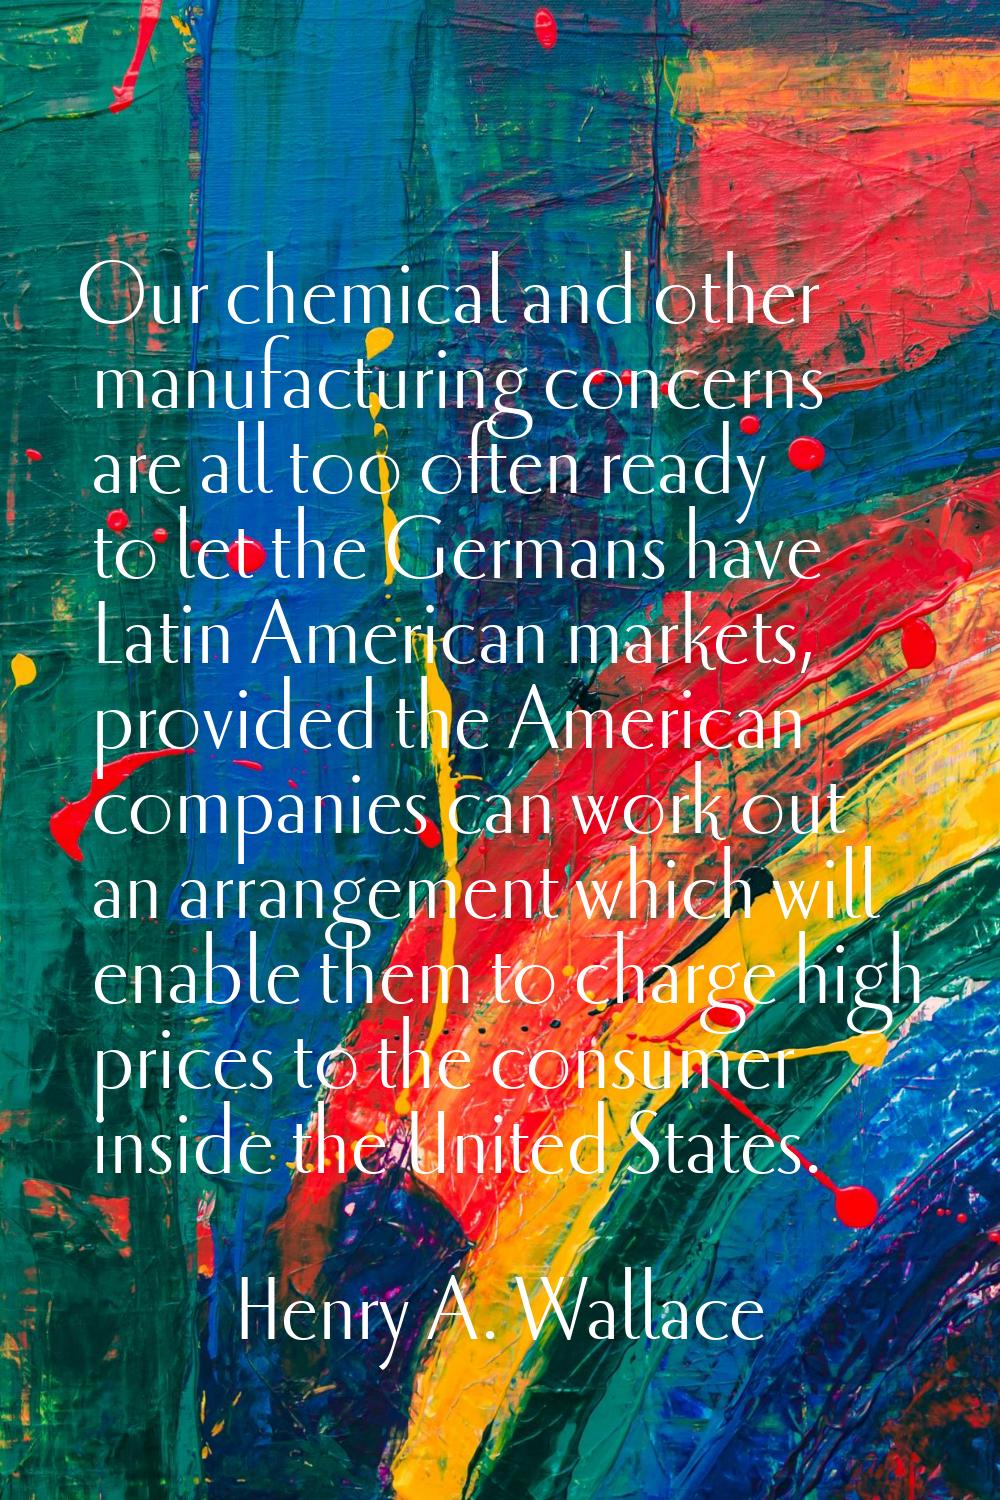 Our chemical and other manufacturing concerns are all too often ready to let the Germans have Latin